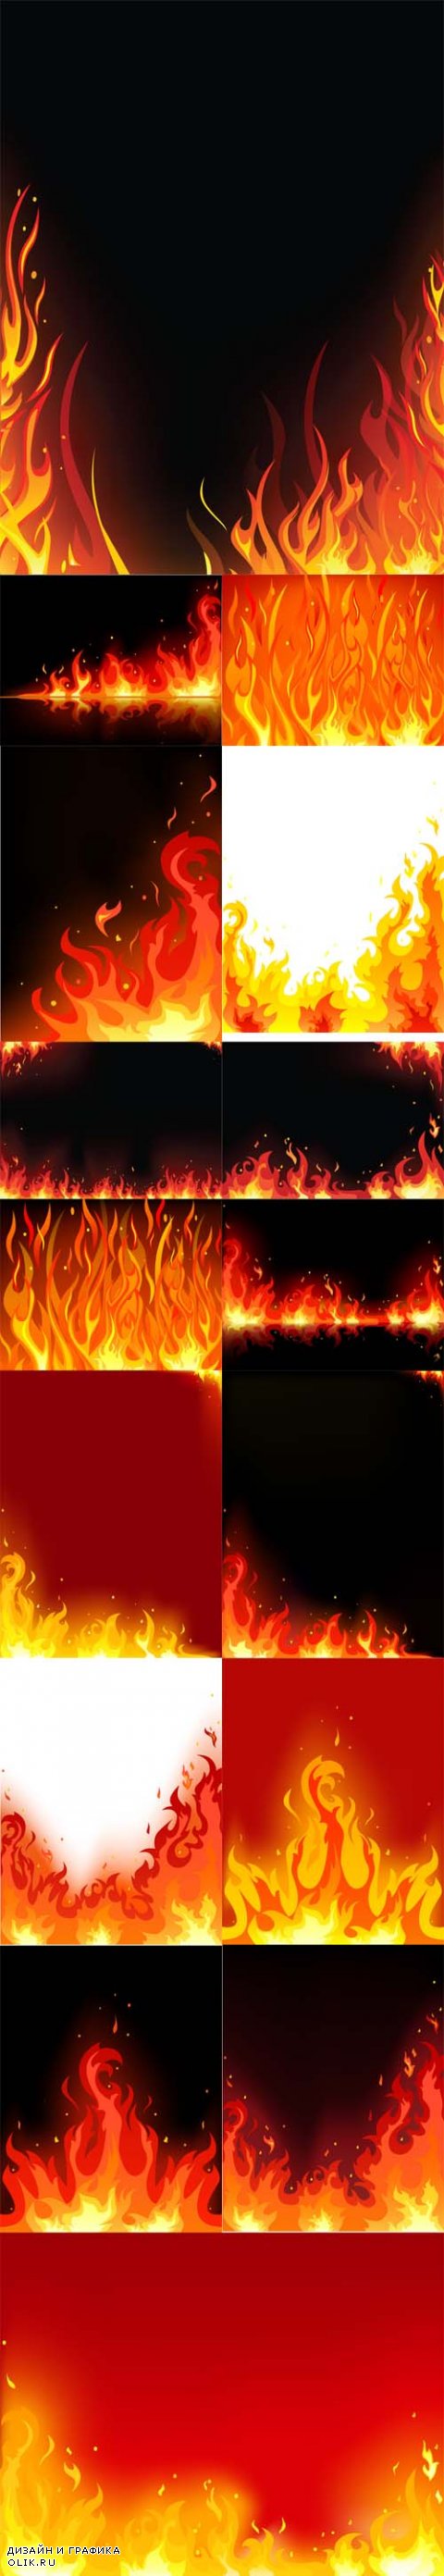 Vector Fire Backgrounds